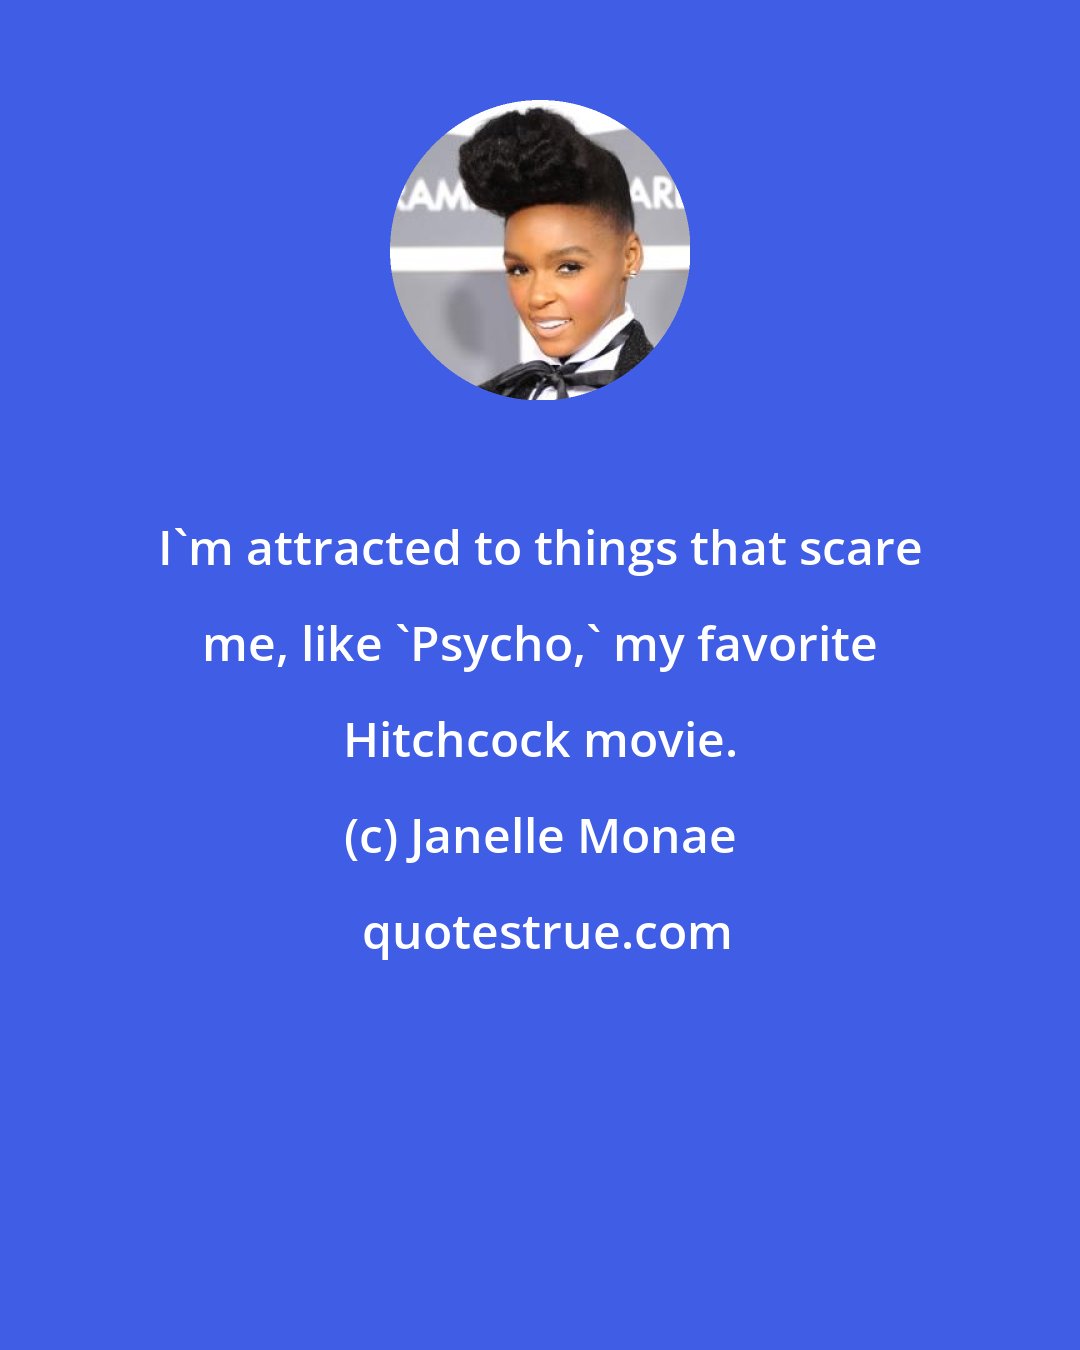 Janelle Monae: I'm attracted to things that scare me, like 'Psycho,' my favorite Hitchcock movie.